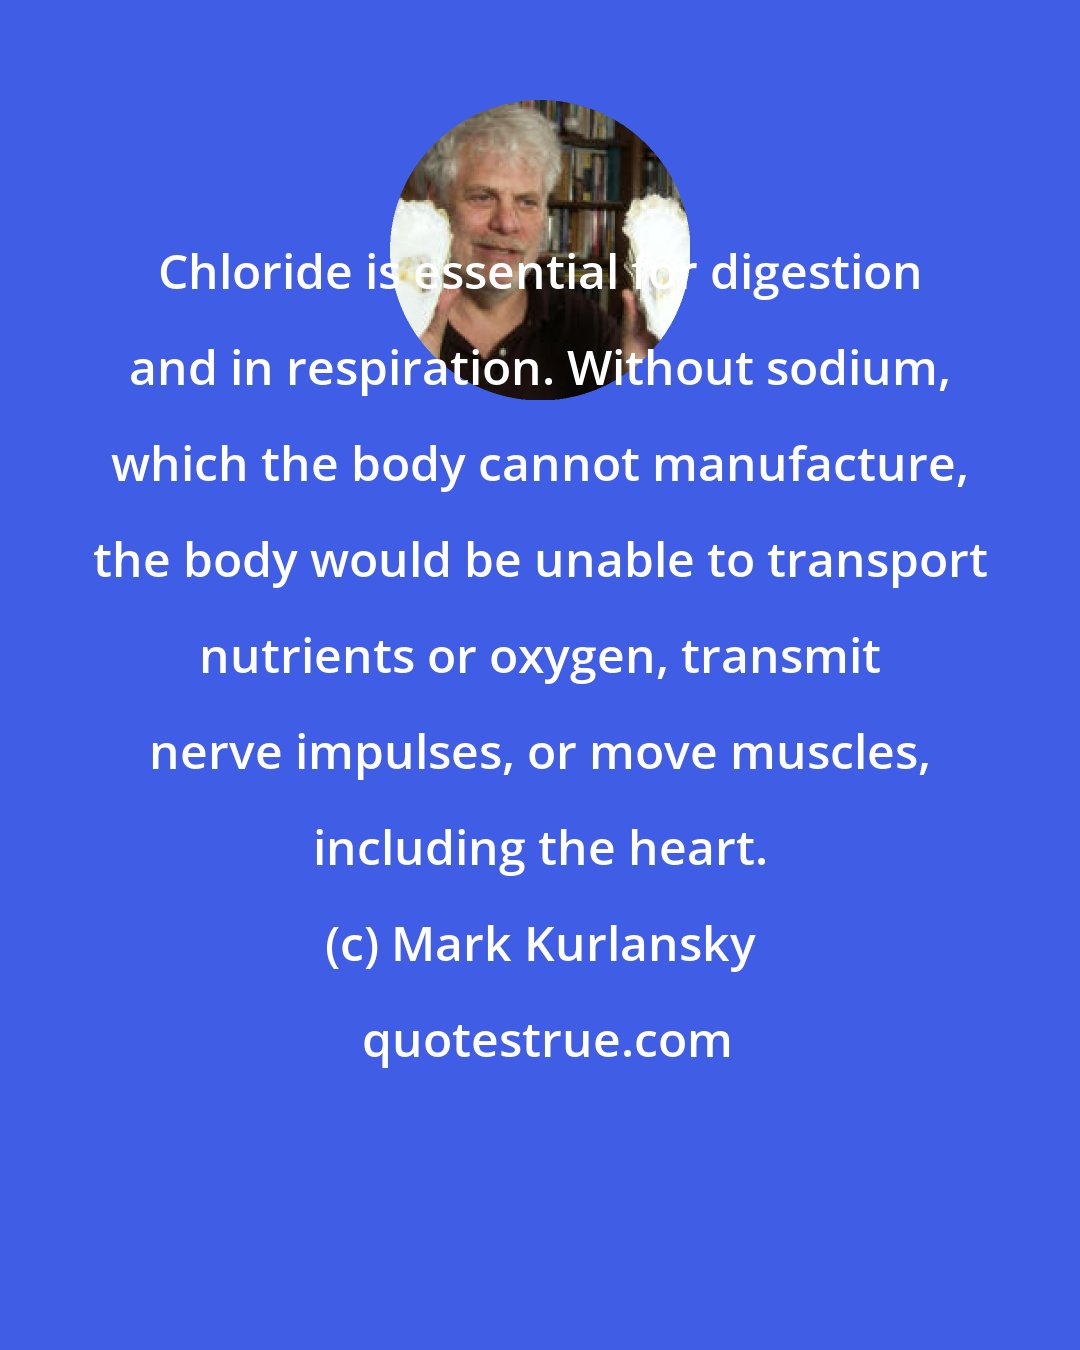 Mark Kurlansky: Chloride is essential for digestion and in respiration. Without sodium, which the body cannot manufacture, the body would be unable to transport nutrients or oxygen, transmit nerve impulses, or move muscles, including the heart.